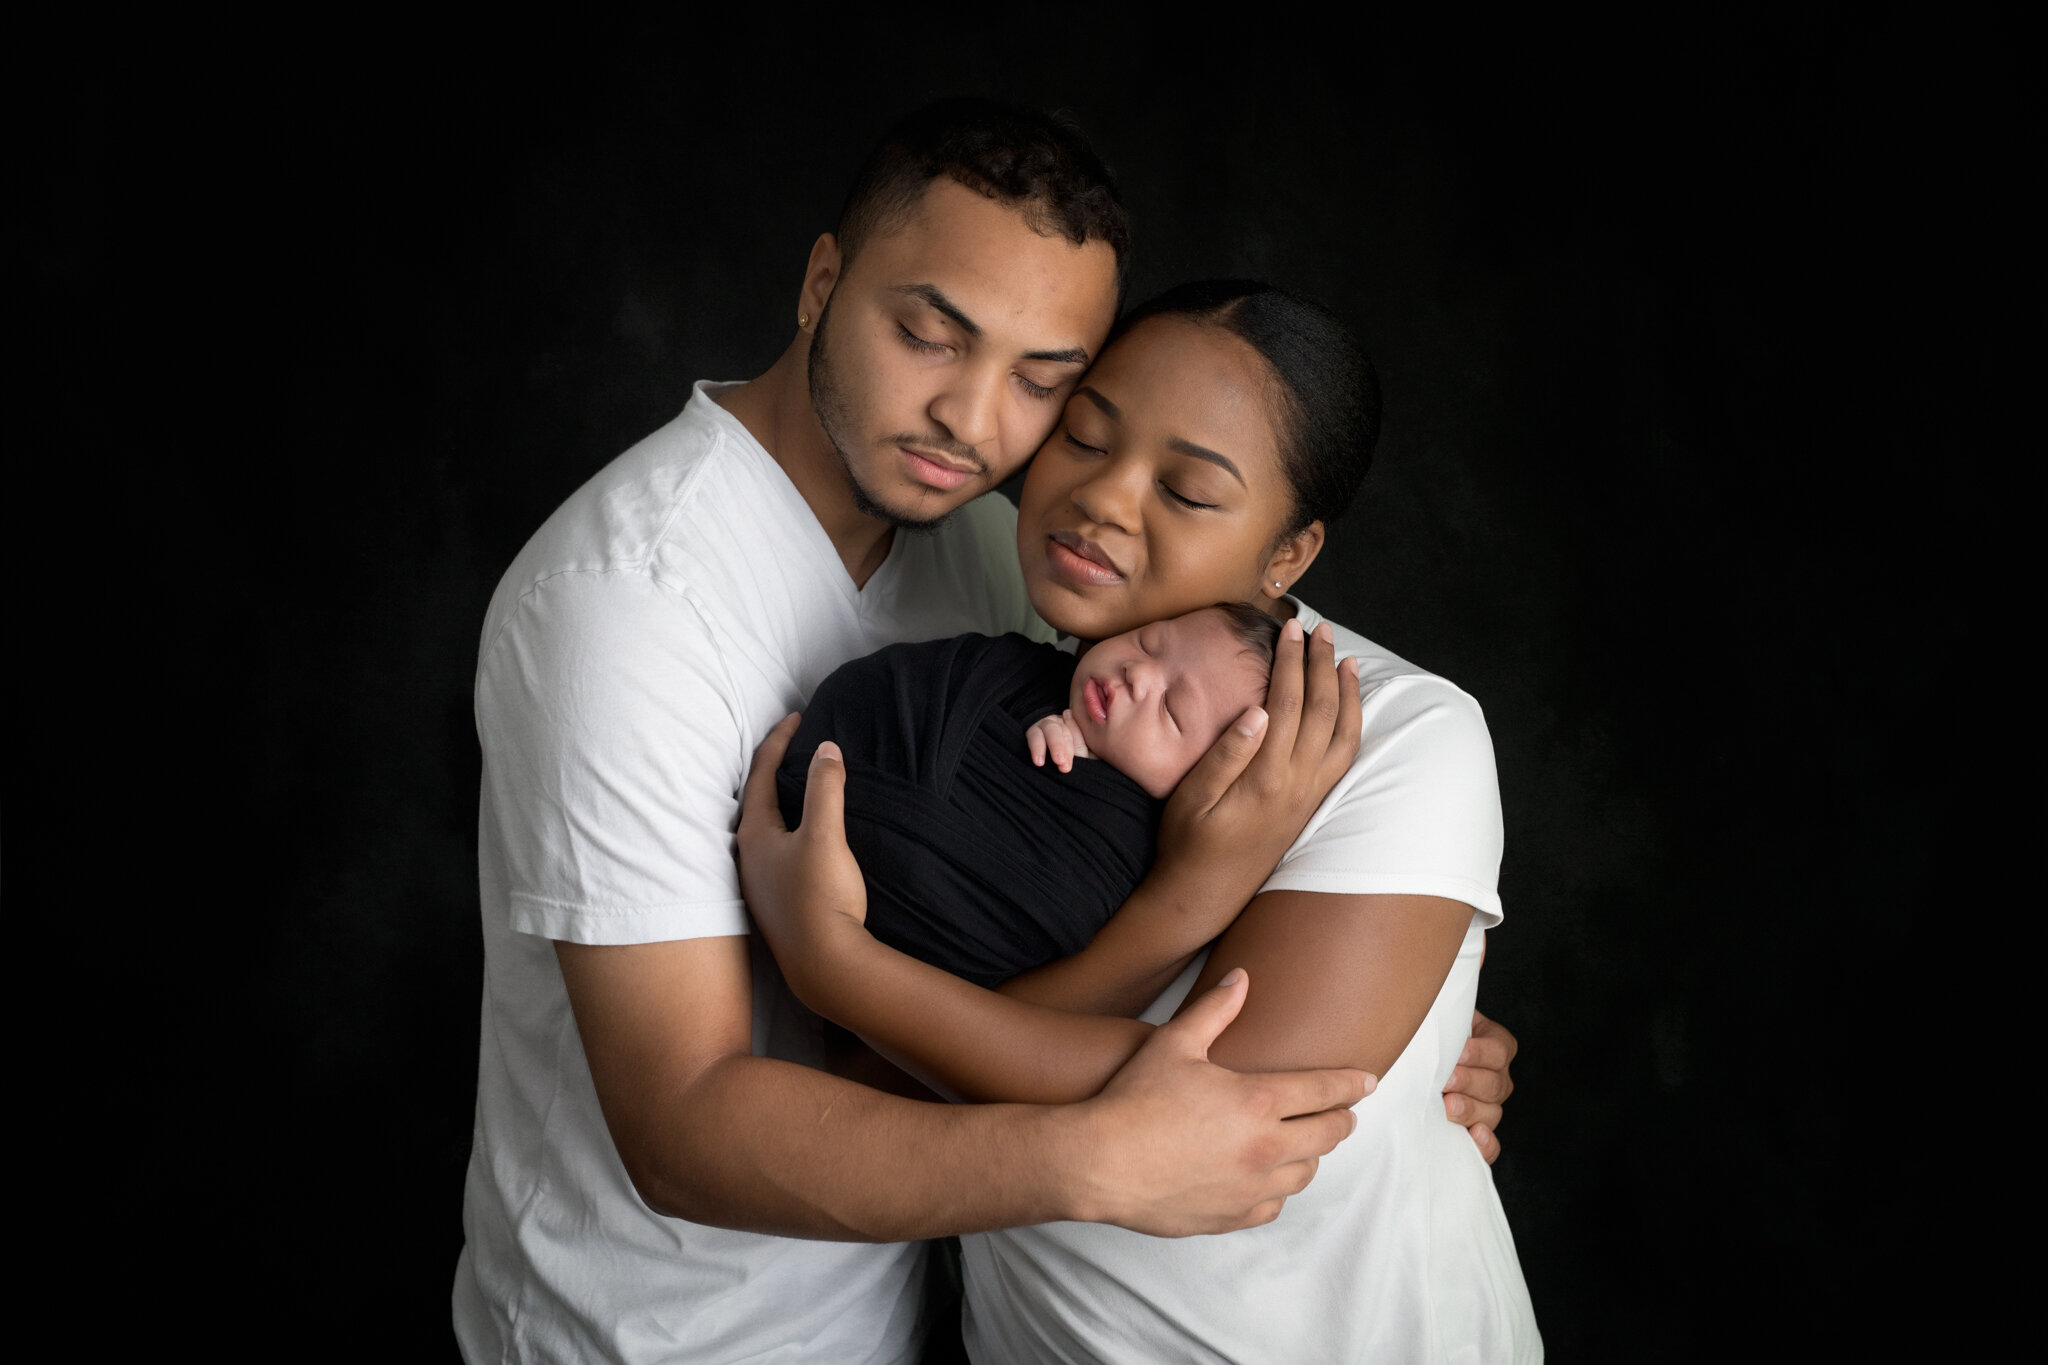 Parent_Pose_Newborn_Session_Family_Pictures_New_Mom_New_Dad_Studio_Portraits_Posed_Newborn_Session_by_Christie_Leigh_Photo_Mahoning_County_Ohio-1.JPG